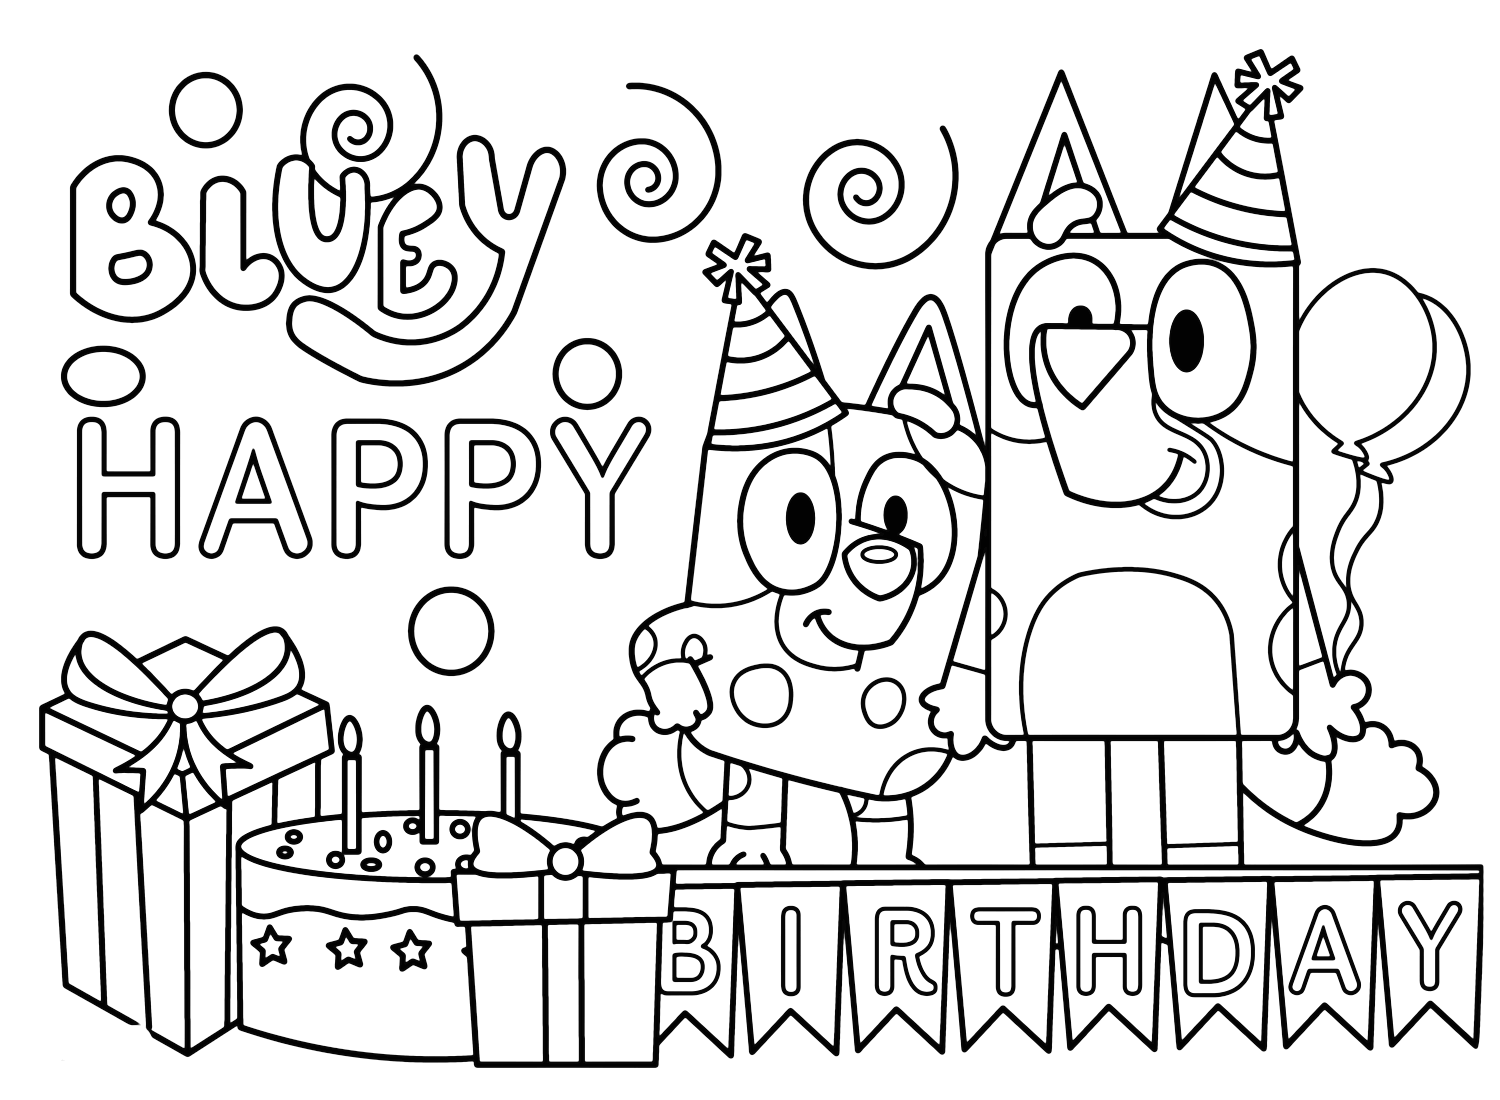 Bluey Coloring Pages - Free Printable Coloring Pages